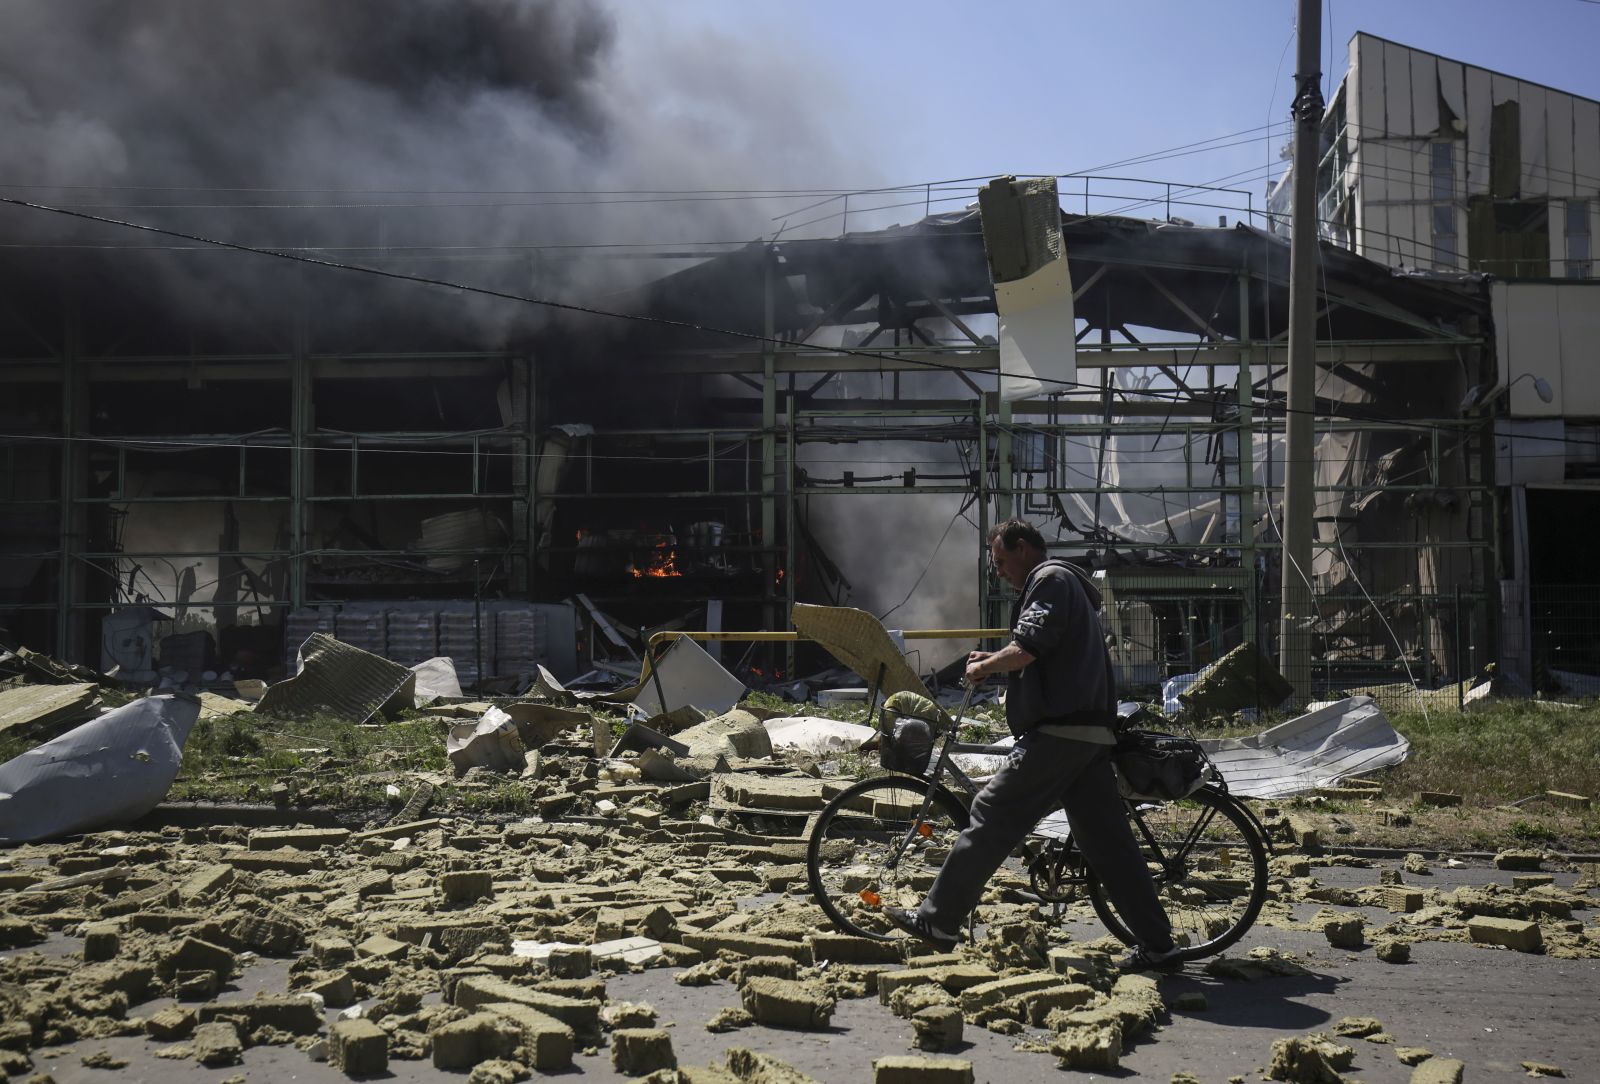 epa09980178 A local man pushing a bicycle walks past a building on fire after shelling in the small city of Bakhmut, Donetsk region, Ukraine, 27 May 2022. On 24 February, Russian troops invaded Ukrainian territory starting a conflict that has provoked destruction and a humanitarian crisis. According to the United Nations High Commissioner for Refugees (UNHCR), more than 6.6 million refugees have fled Ukraine, and a further 7.7 million people have been displaced internally within Ukraine since.  EPA/STRINGER